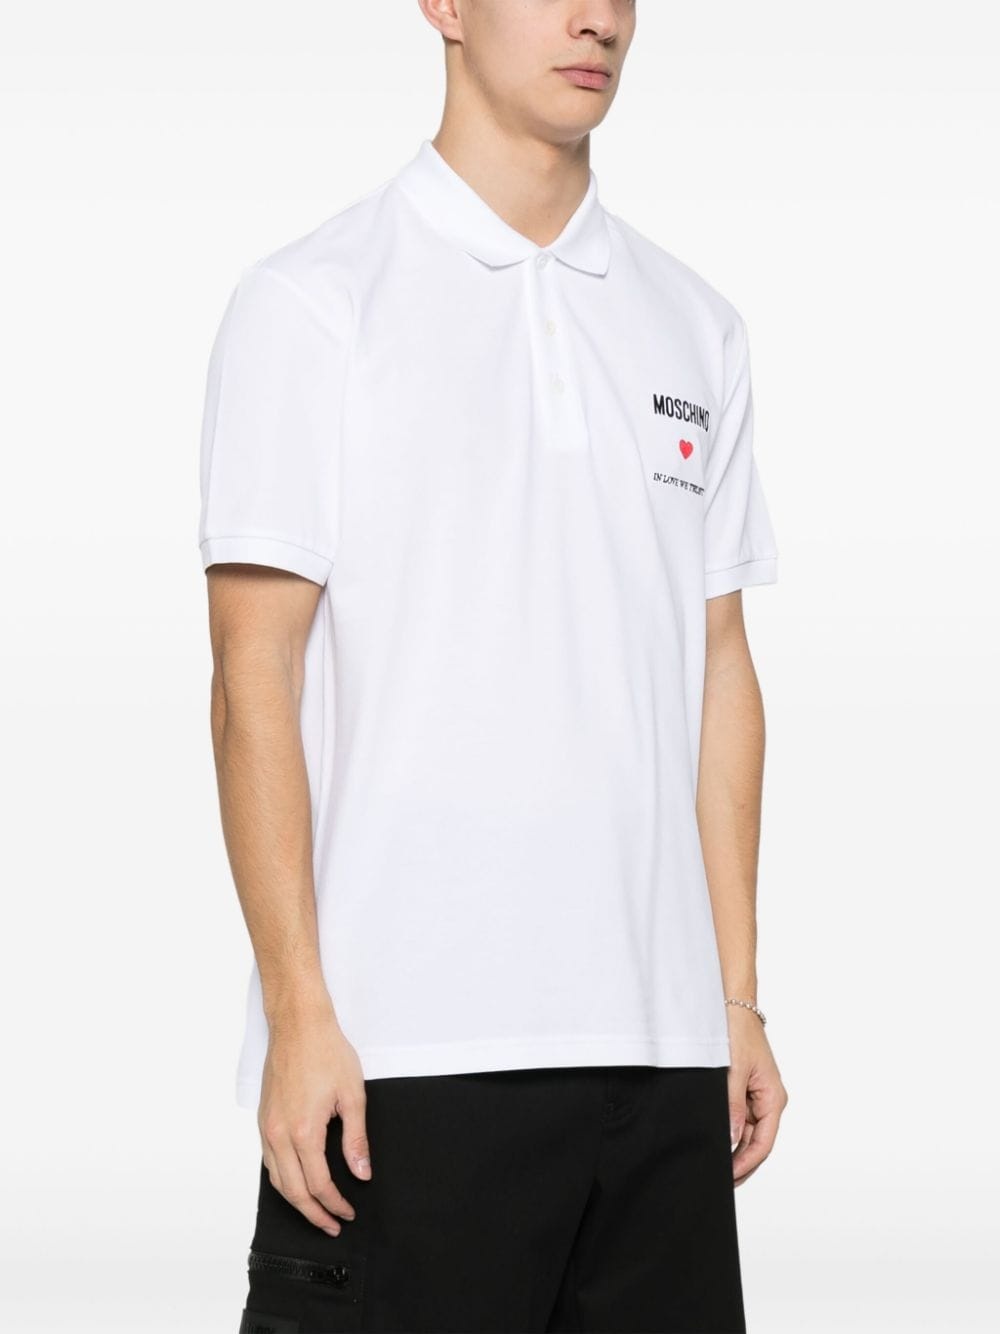 embroidered-quote polo shirt - 3